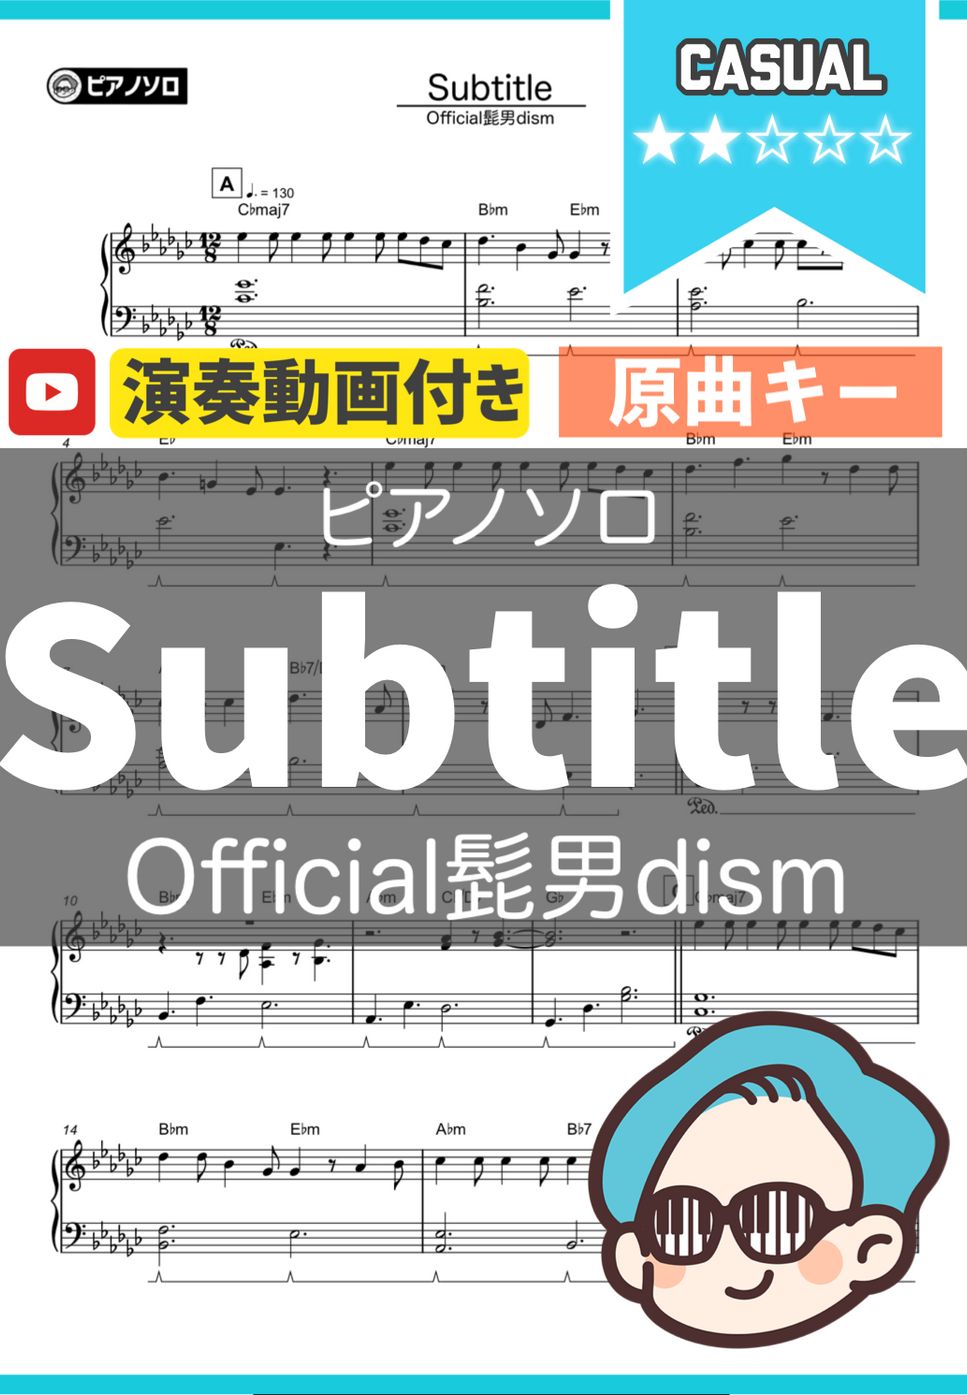 Official髭男dism - Subtitle（初級：原曲キー） by シータピアノ